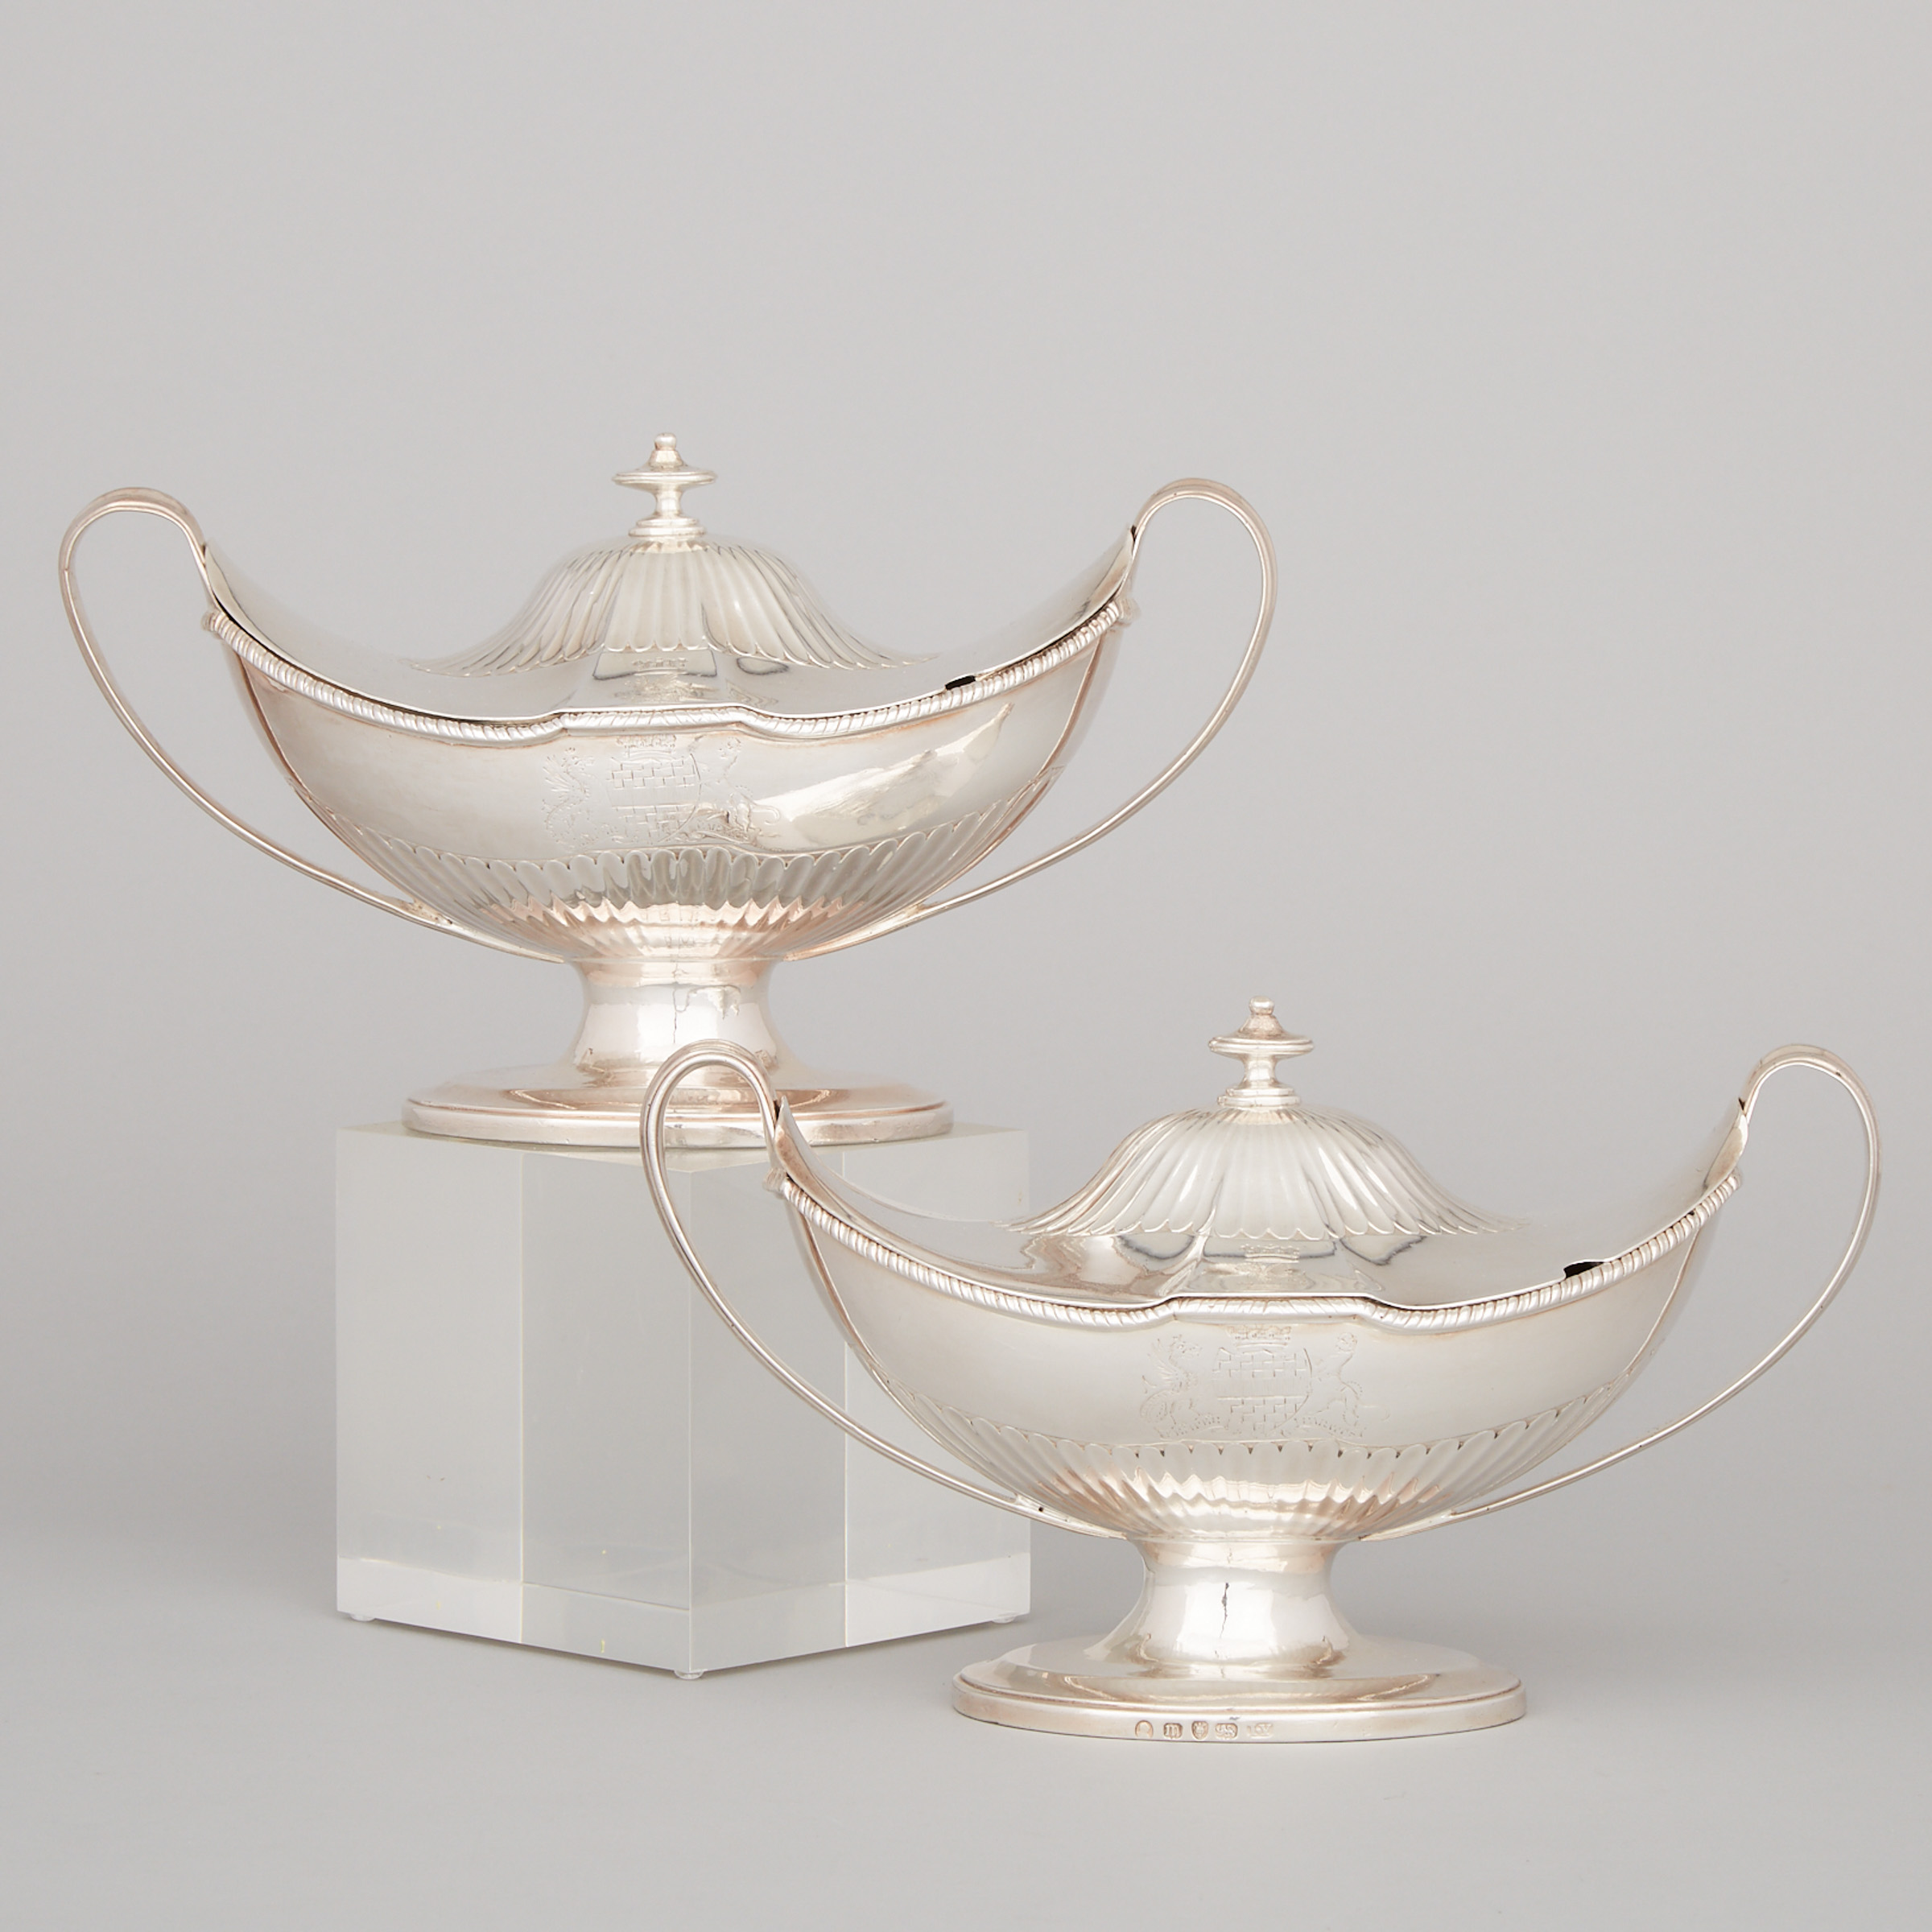 Pair of George III Silver Covered Sauce Tureens, James Young, London, 1787